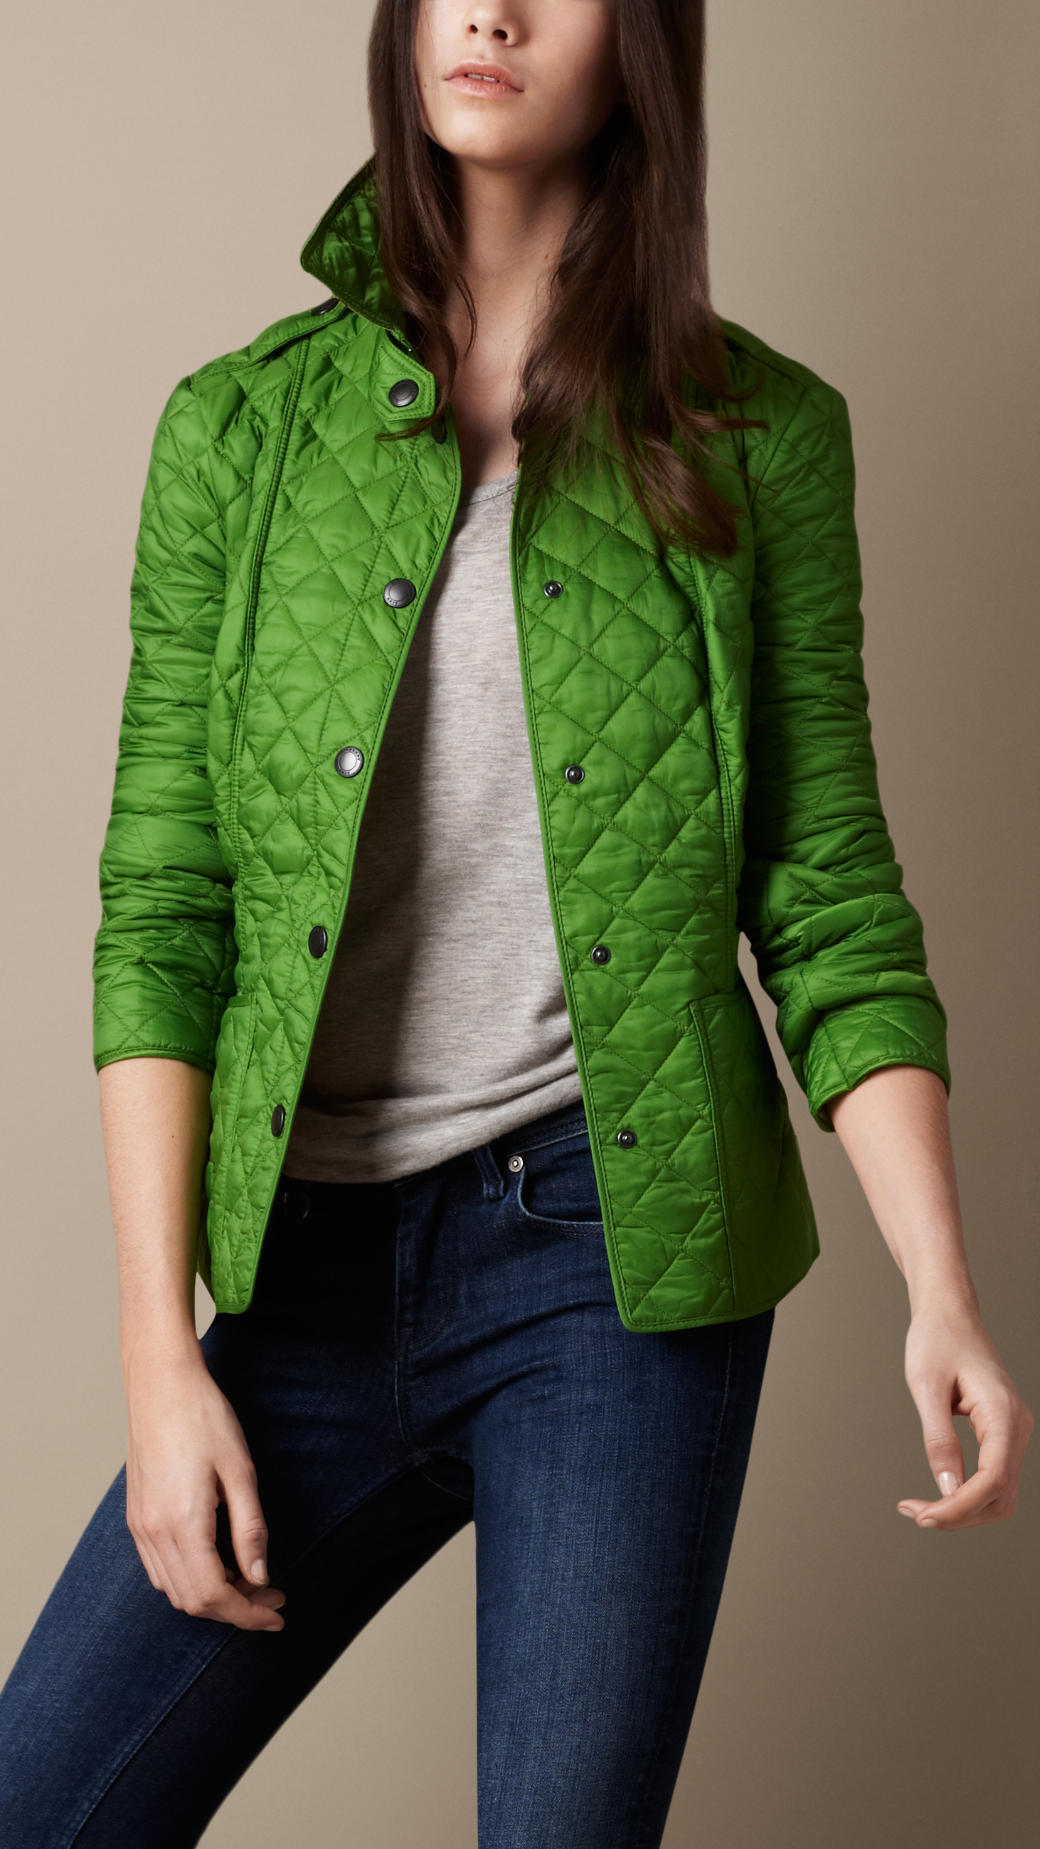 Lyst - Burberry Brit Cropped Quilted Jacket in Green